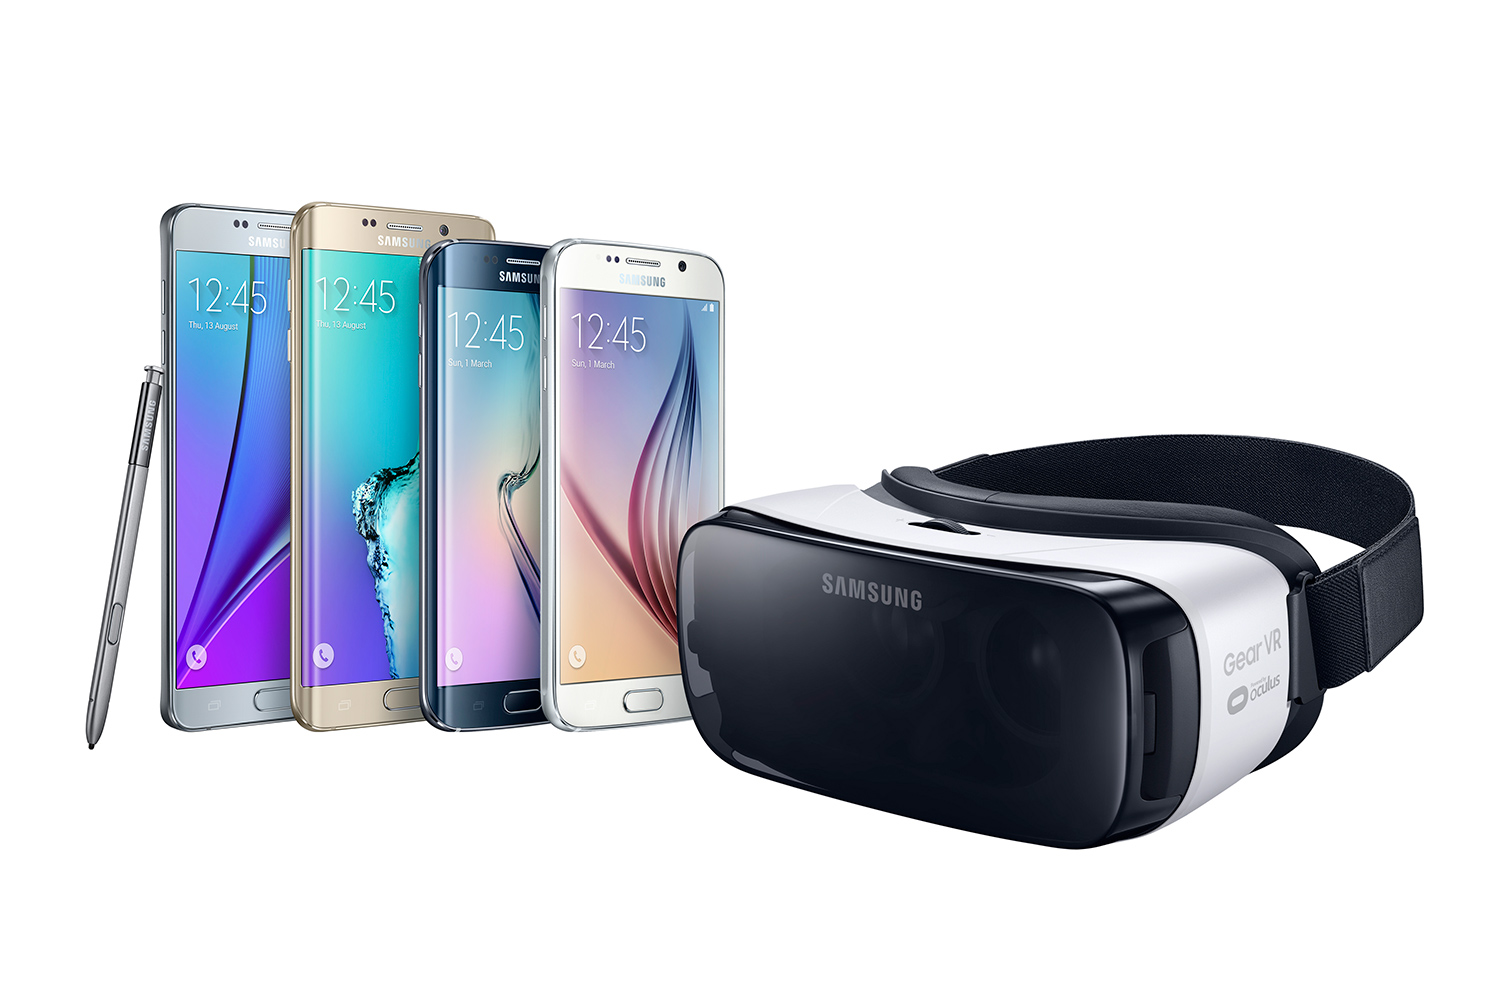 the new samsung gear vr will retail for 99 gearvr 005 group